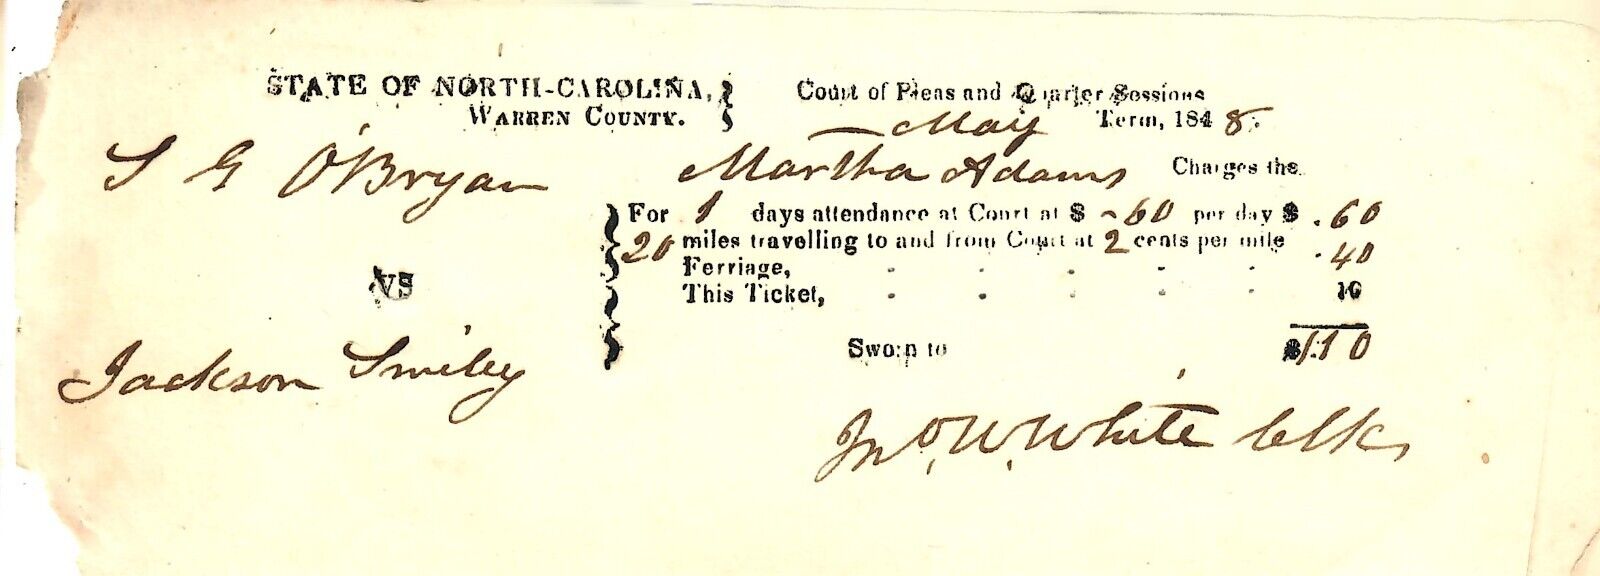 1848 Warren County North Carolina NC - COURT OF PLEAS MAY 1848 TERM FOR $1.10